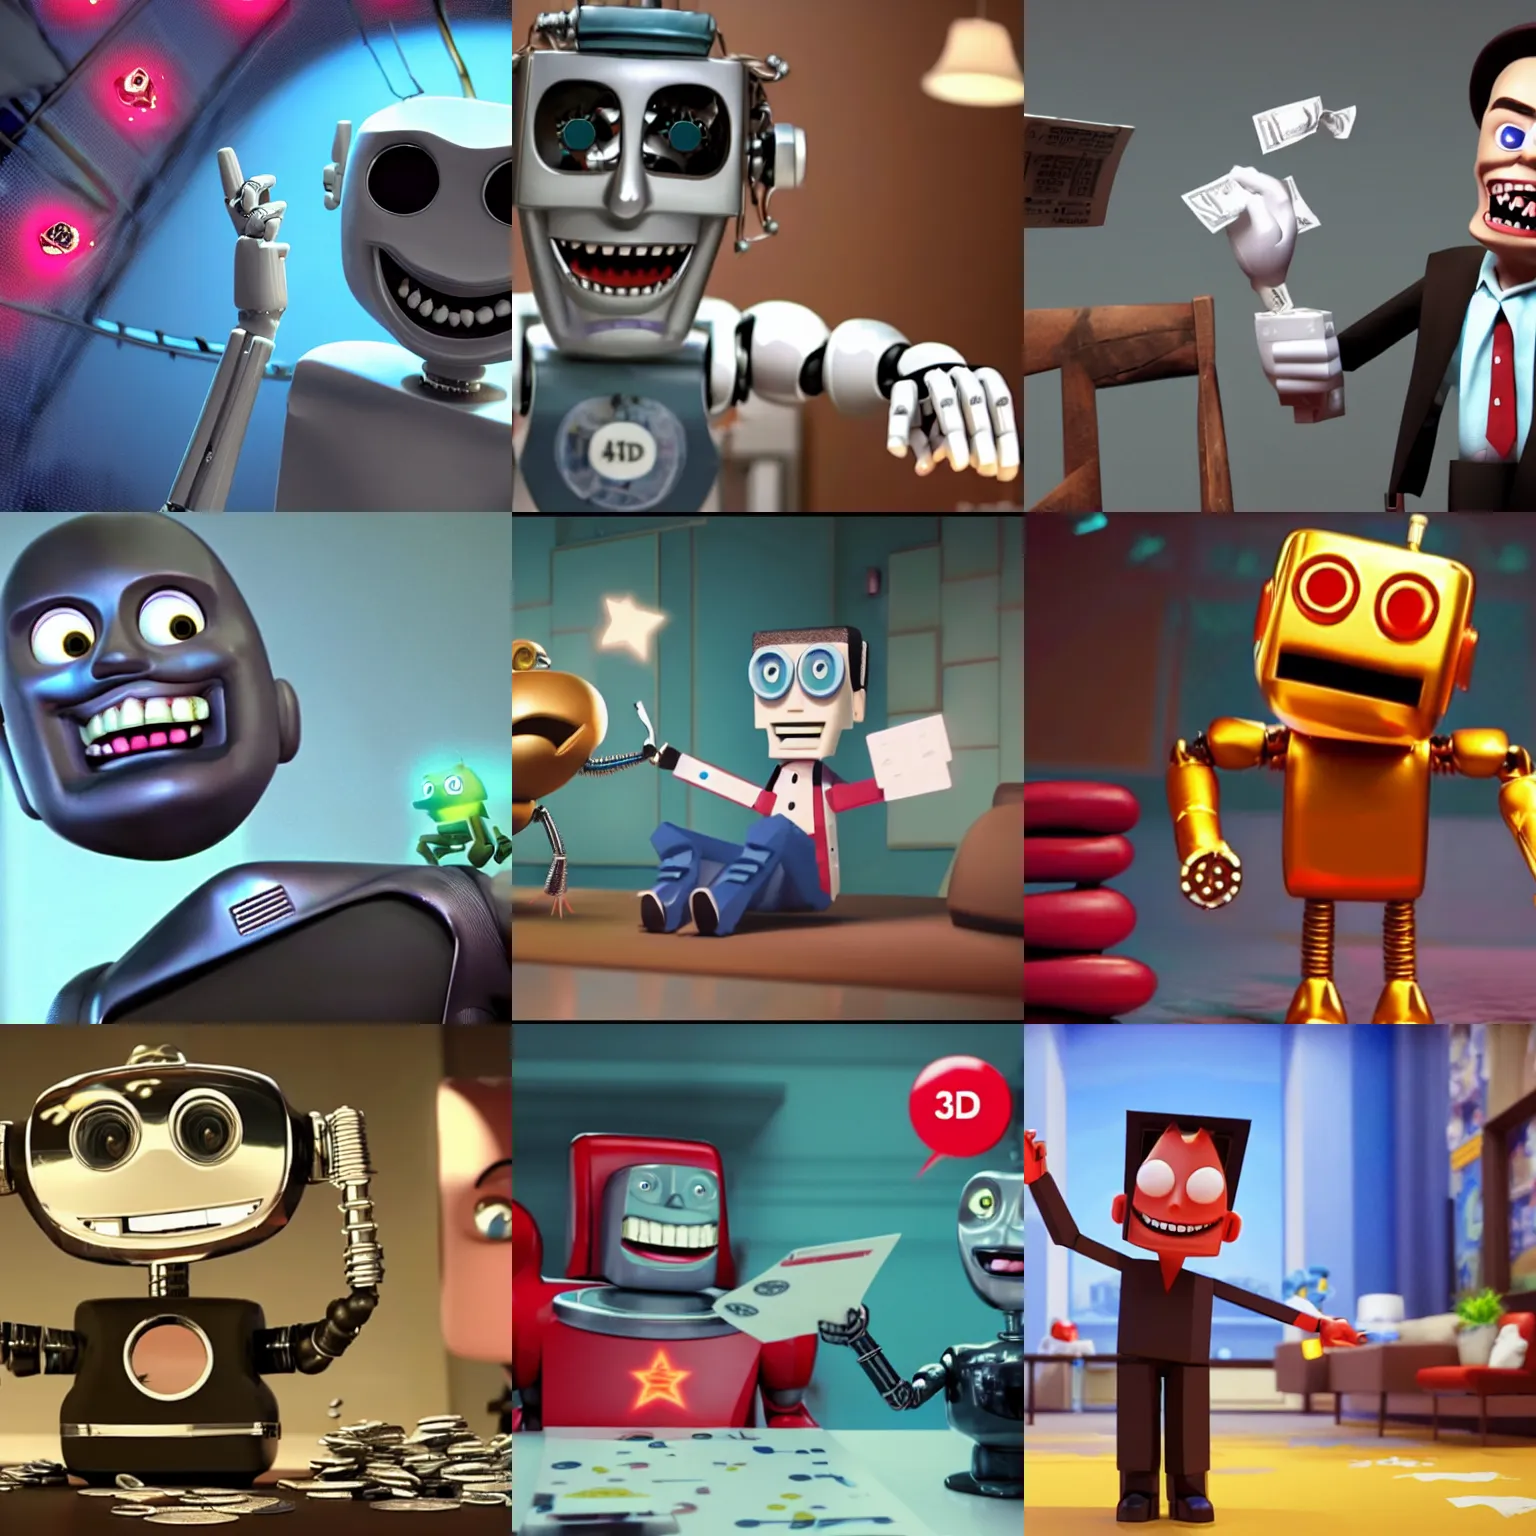 Prompt: < movie type = 3 d - animation reviews ='5 stars'> rich robot laughs maniacally as he calculates his wealth < / movie >